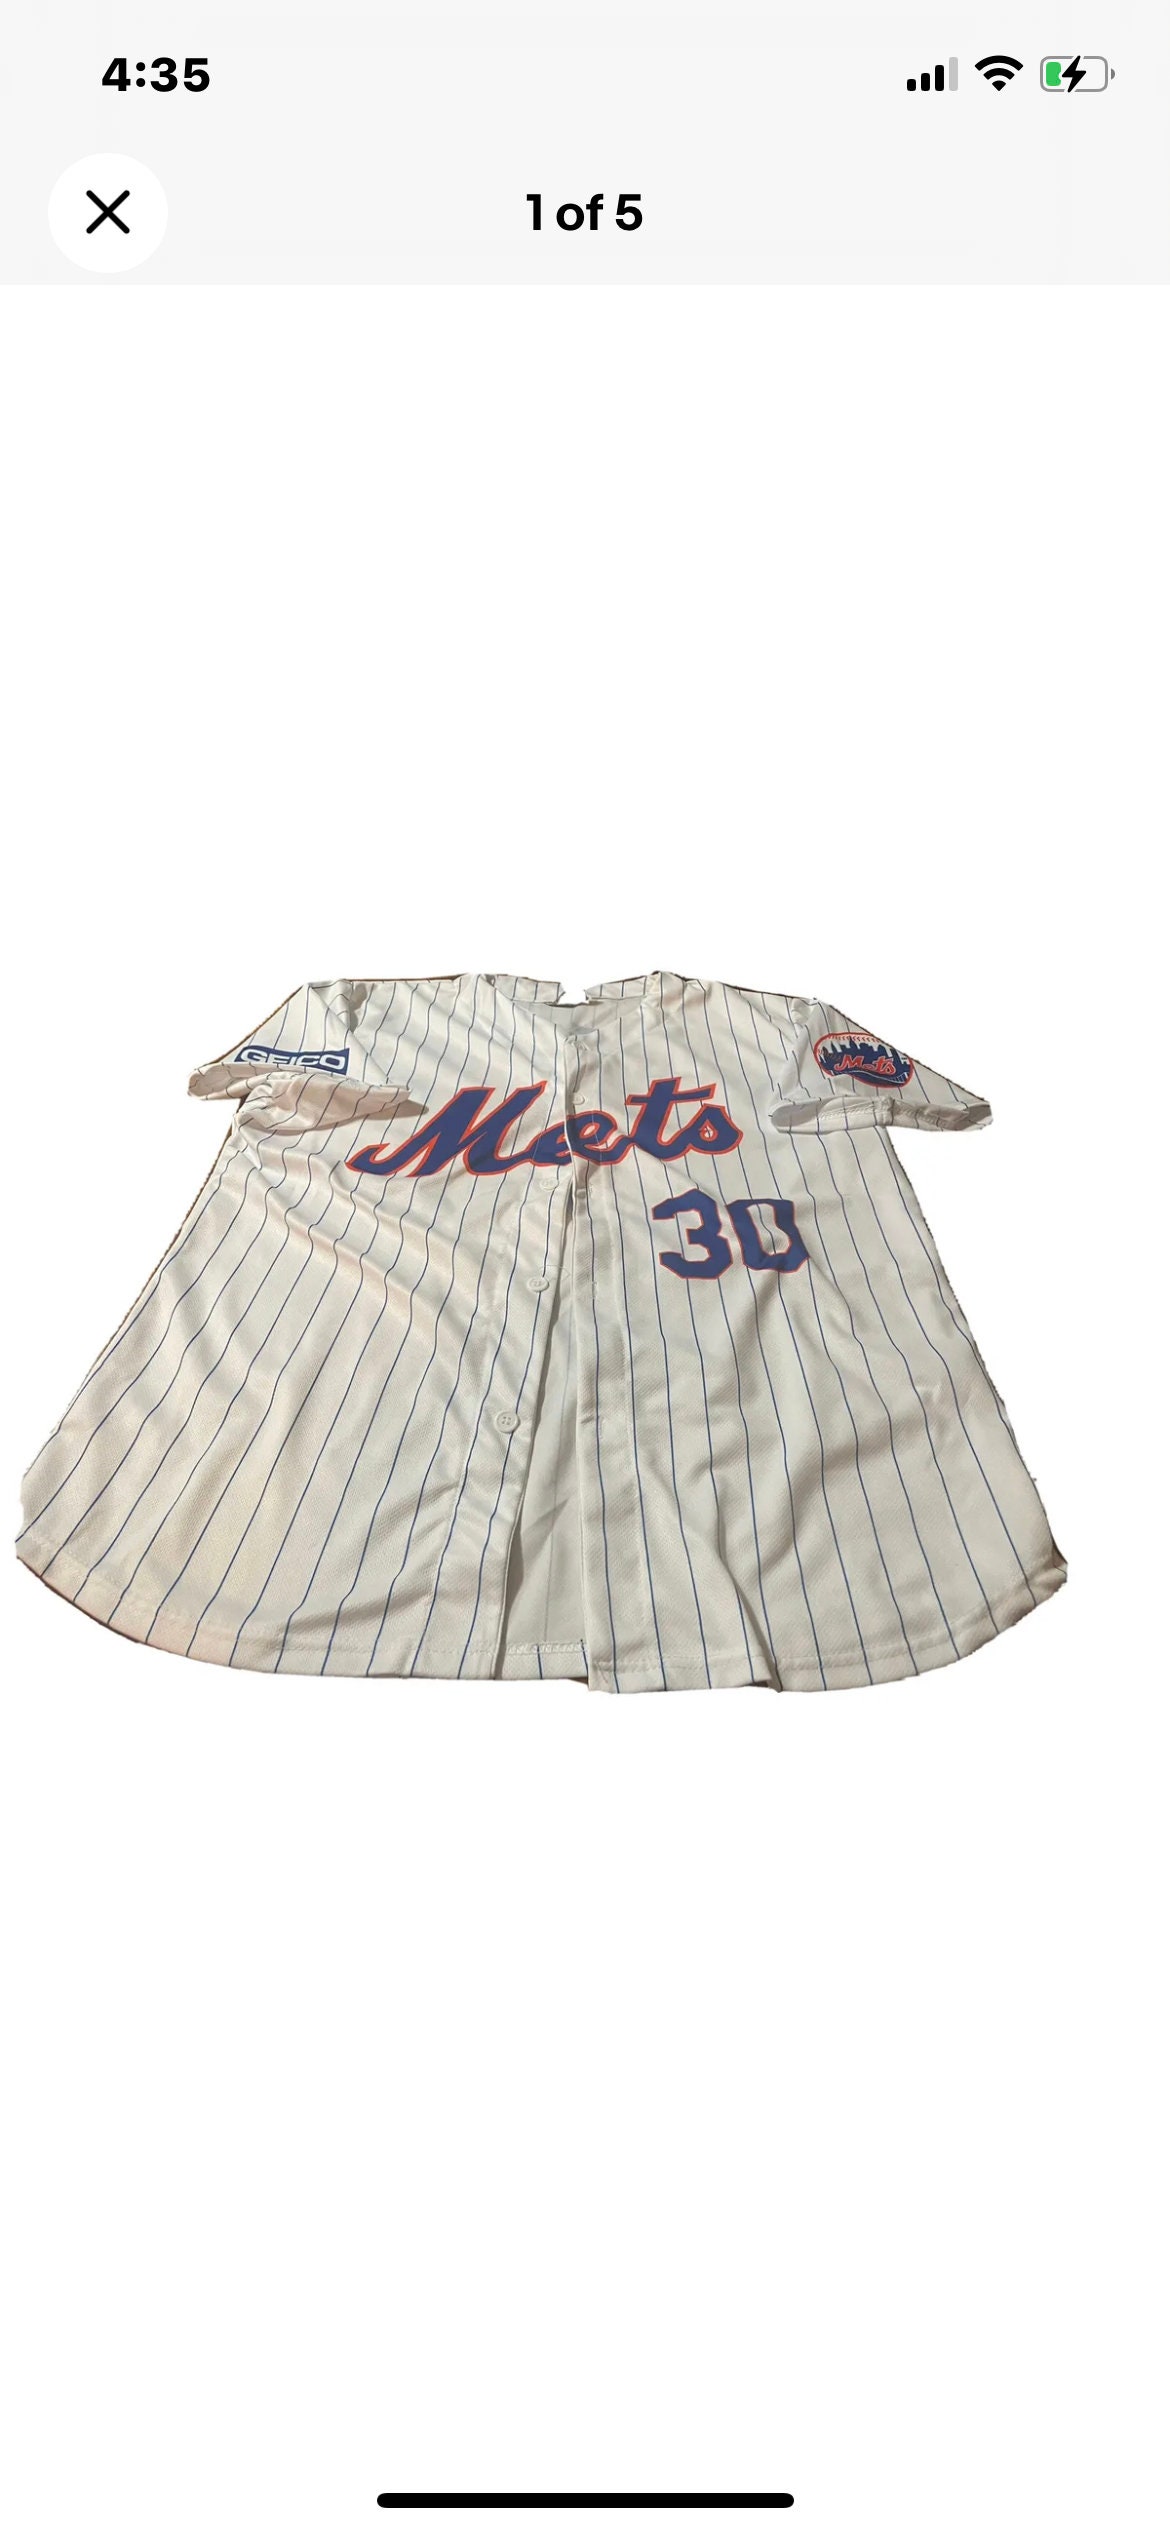 Dwight Gooden NY Mets Mesh Jersey 16 Mitchell & Ness 36 Small  Cooperstown MLB